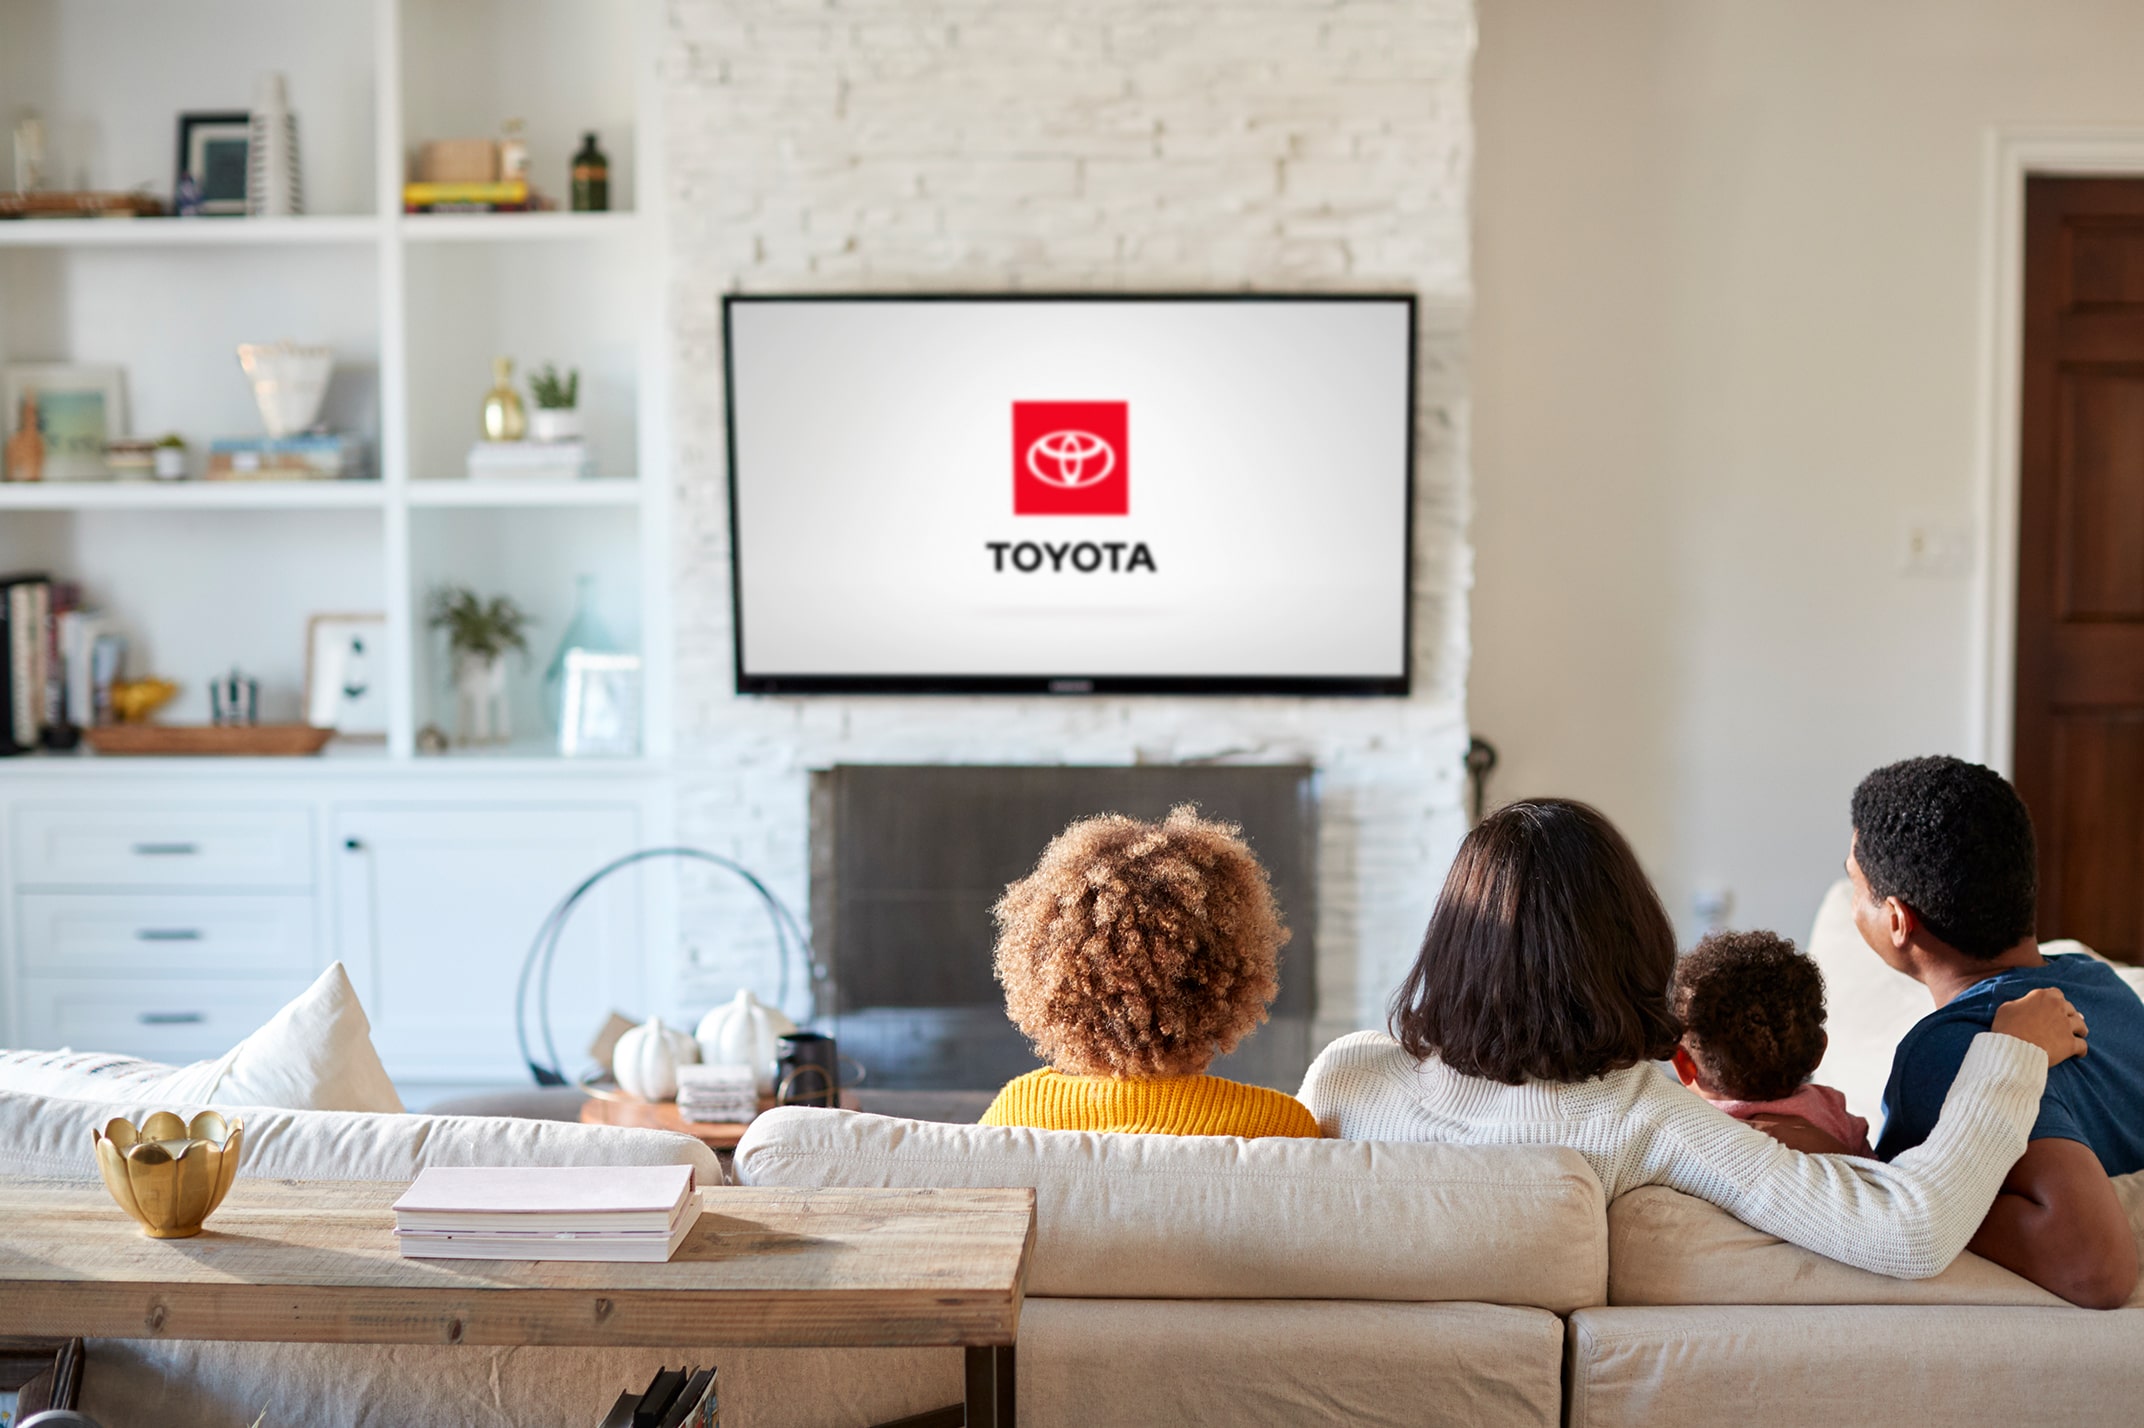 A family sitting together on their couch is watching TV. The Toyota end tag is displayed on the TV screen.